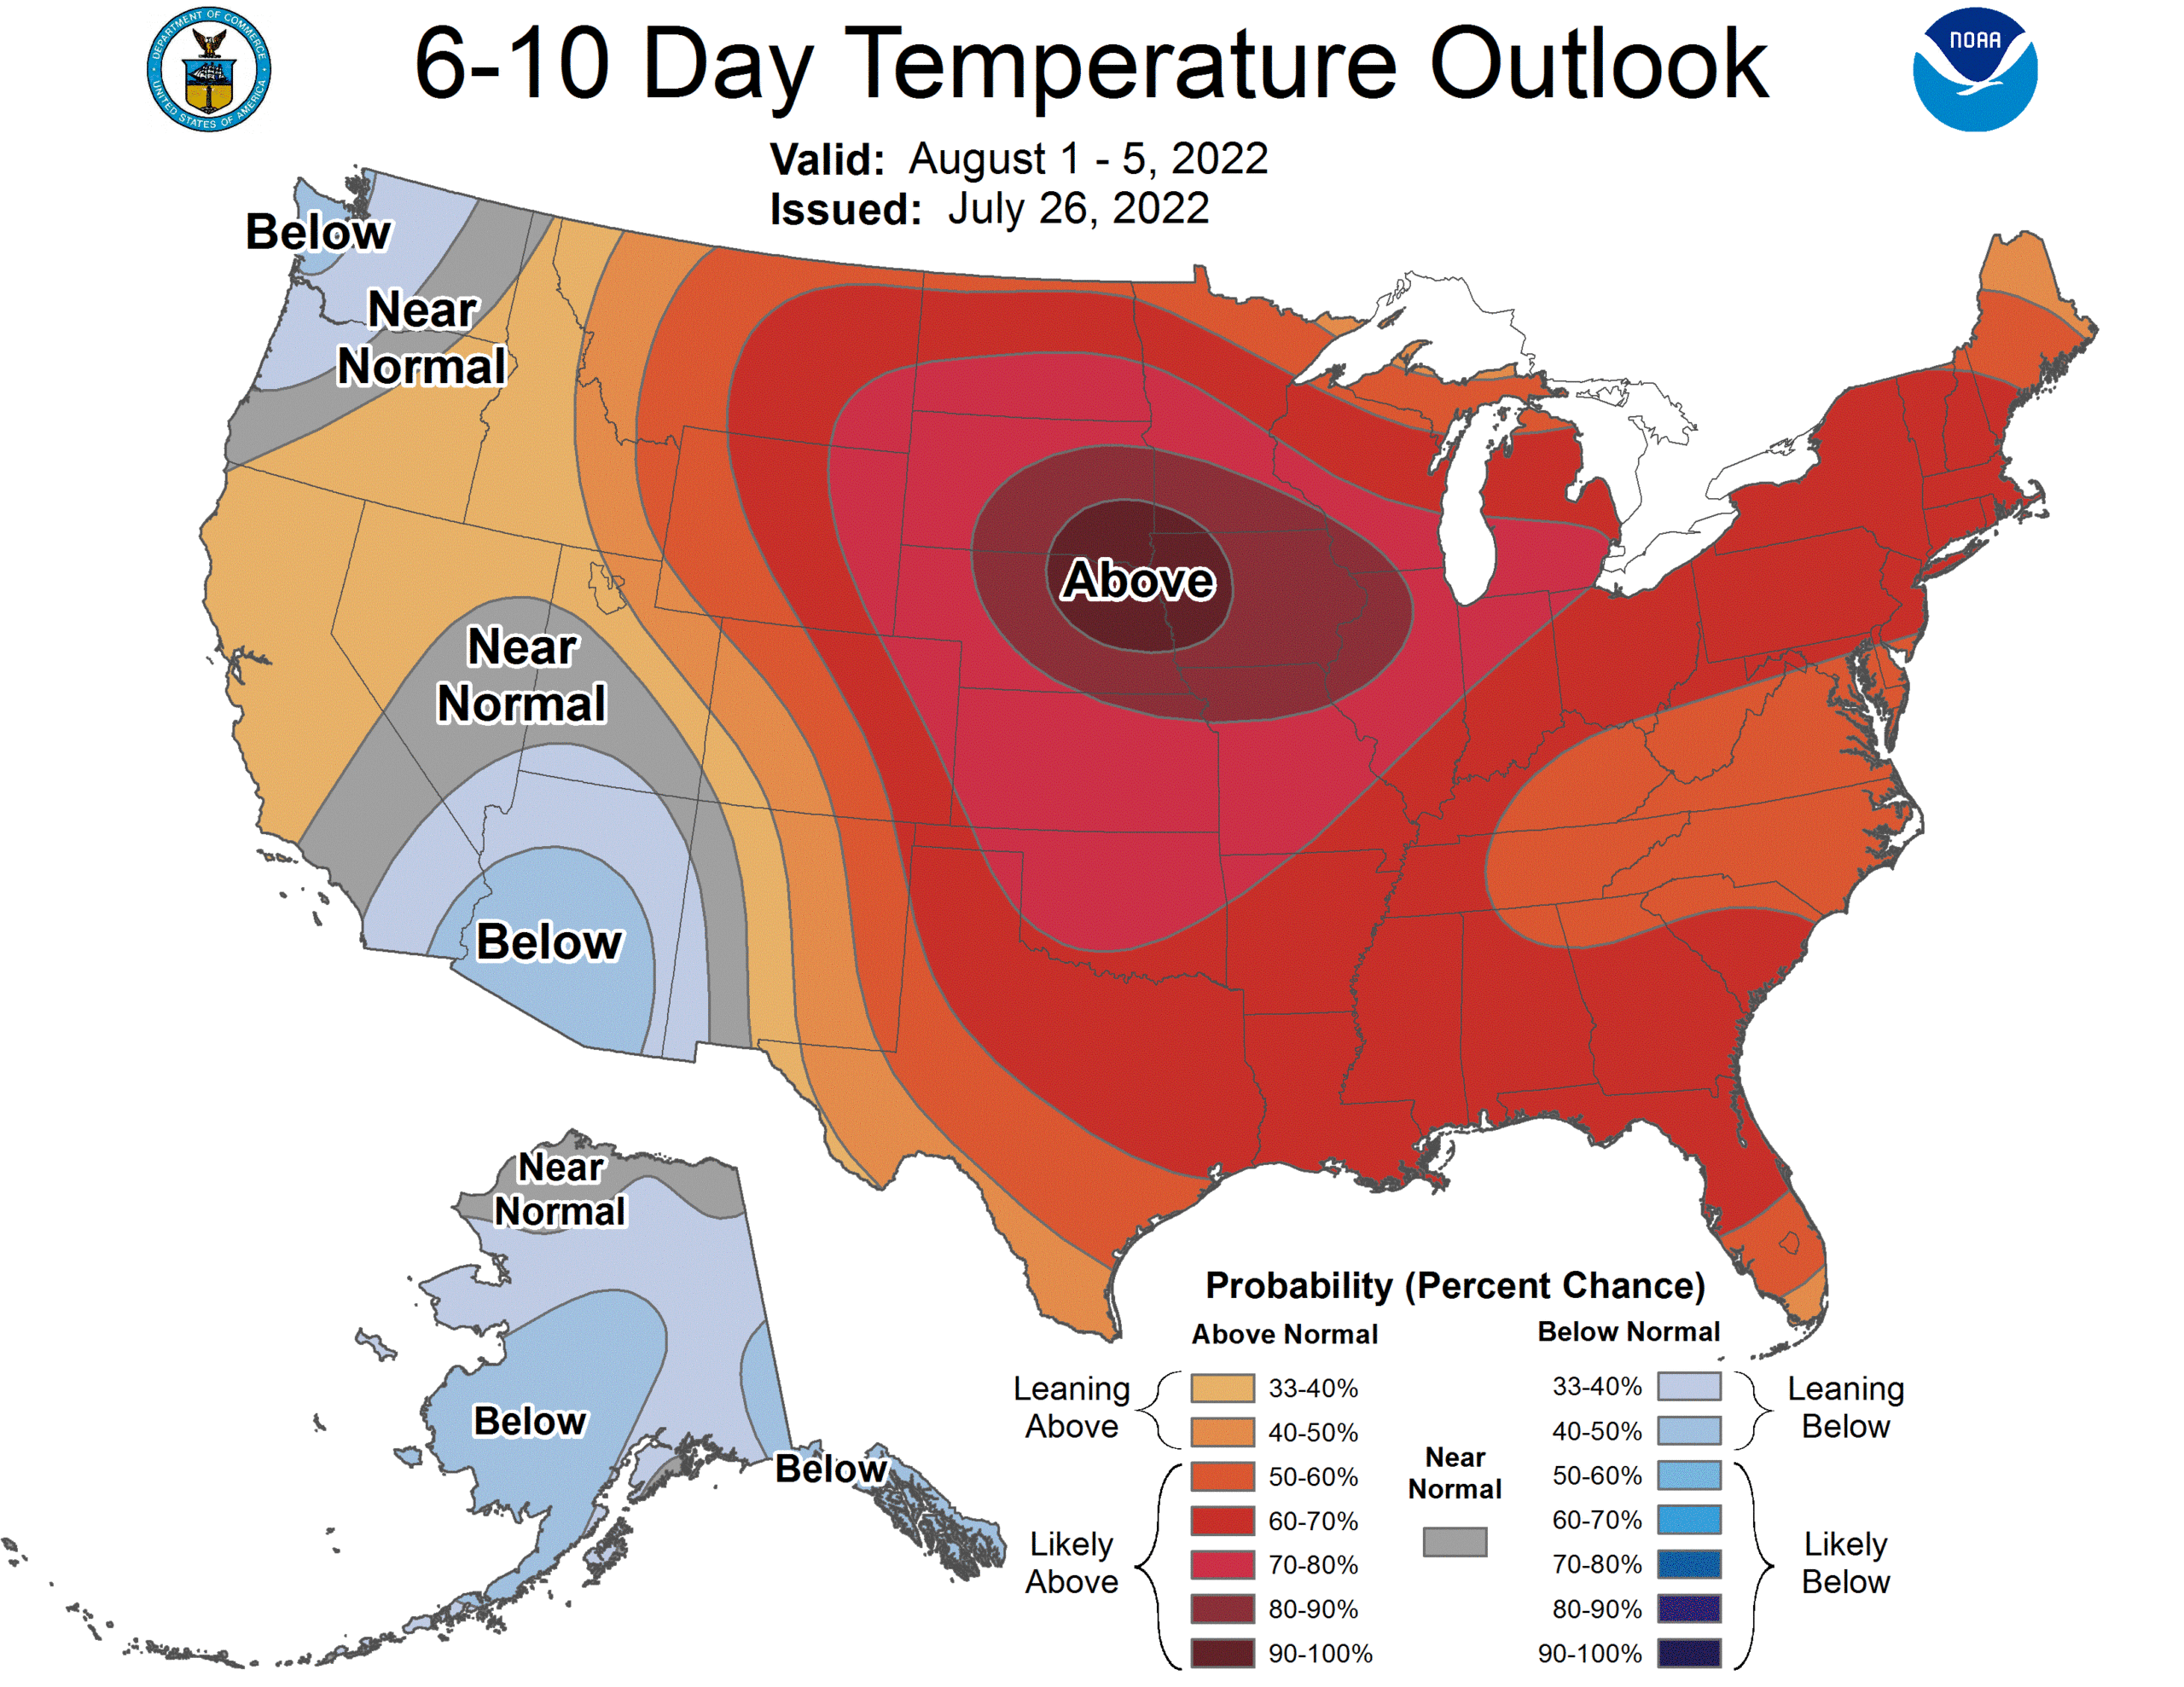 6 to 10 Day Outlook - Temperature Probability